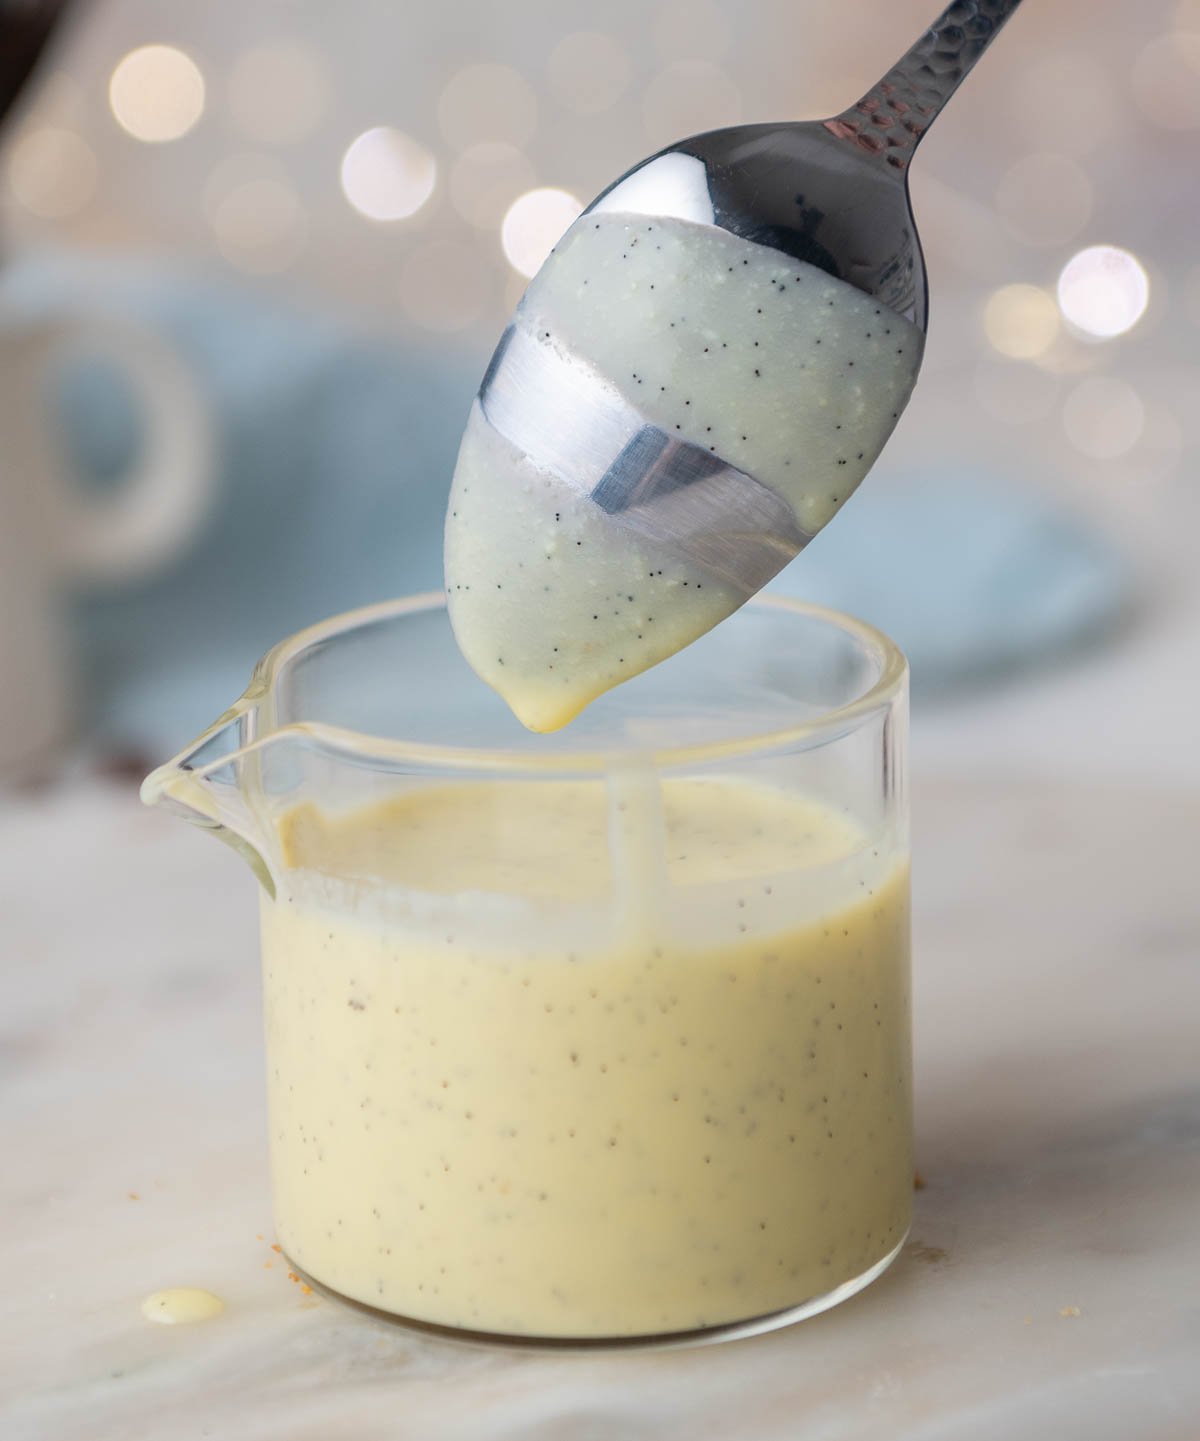 spoon dipped in creme anglaise